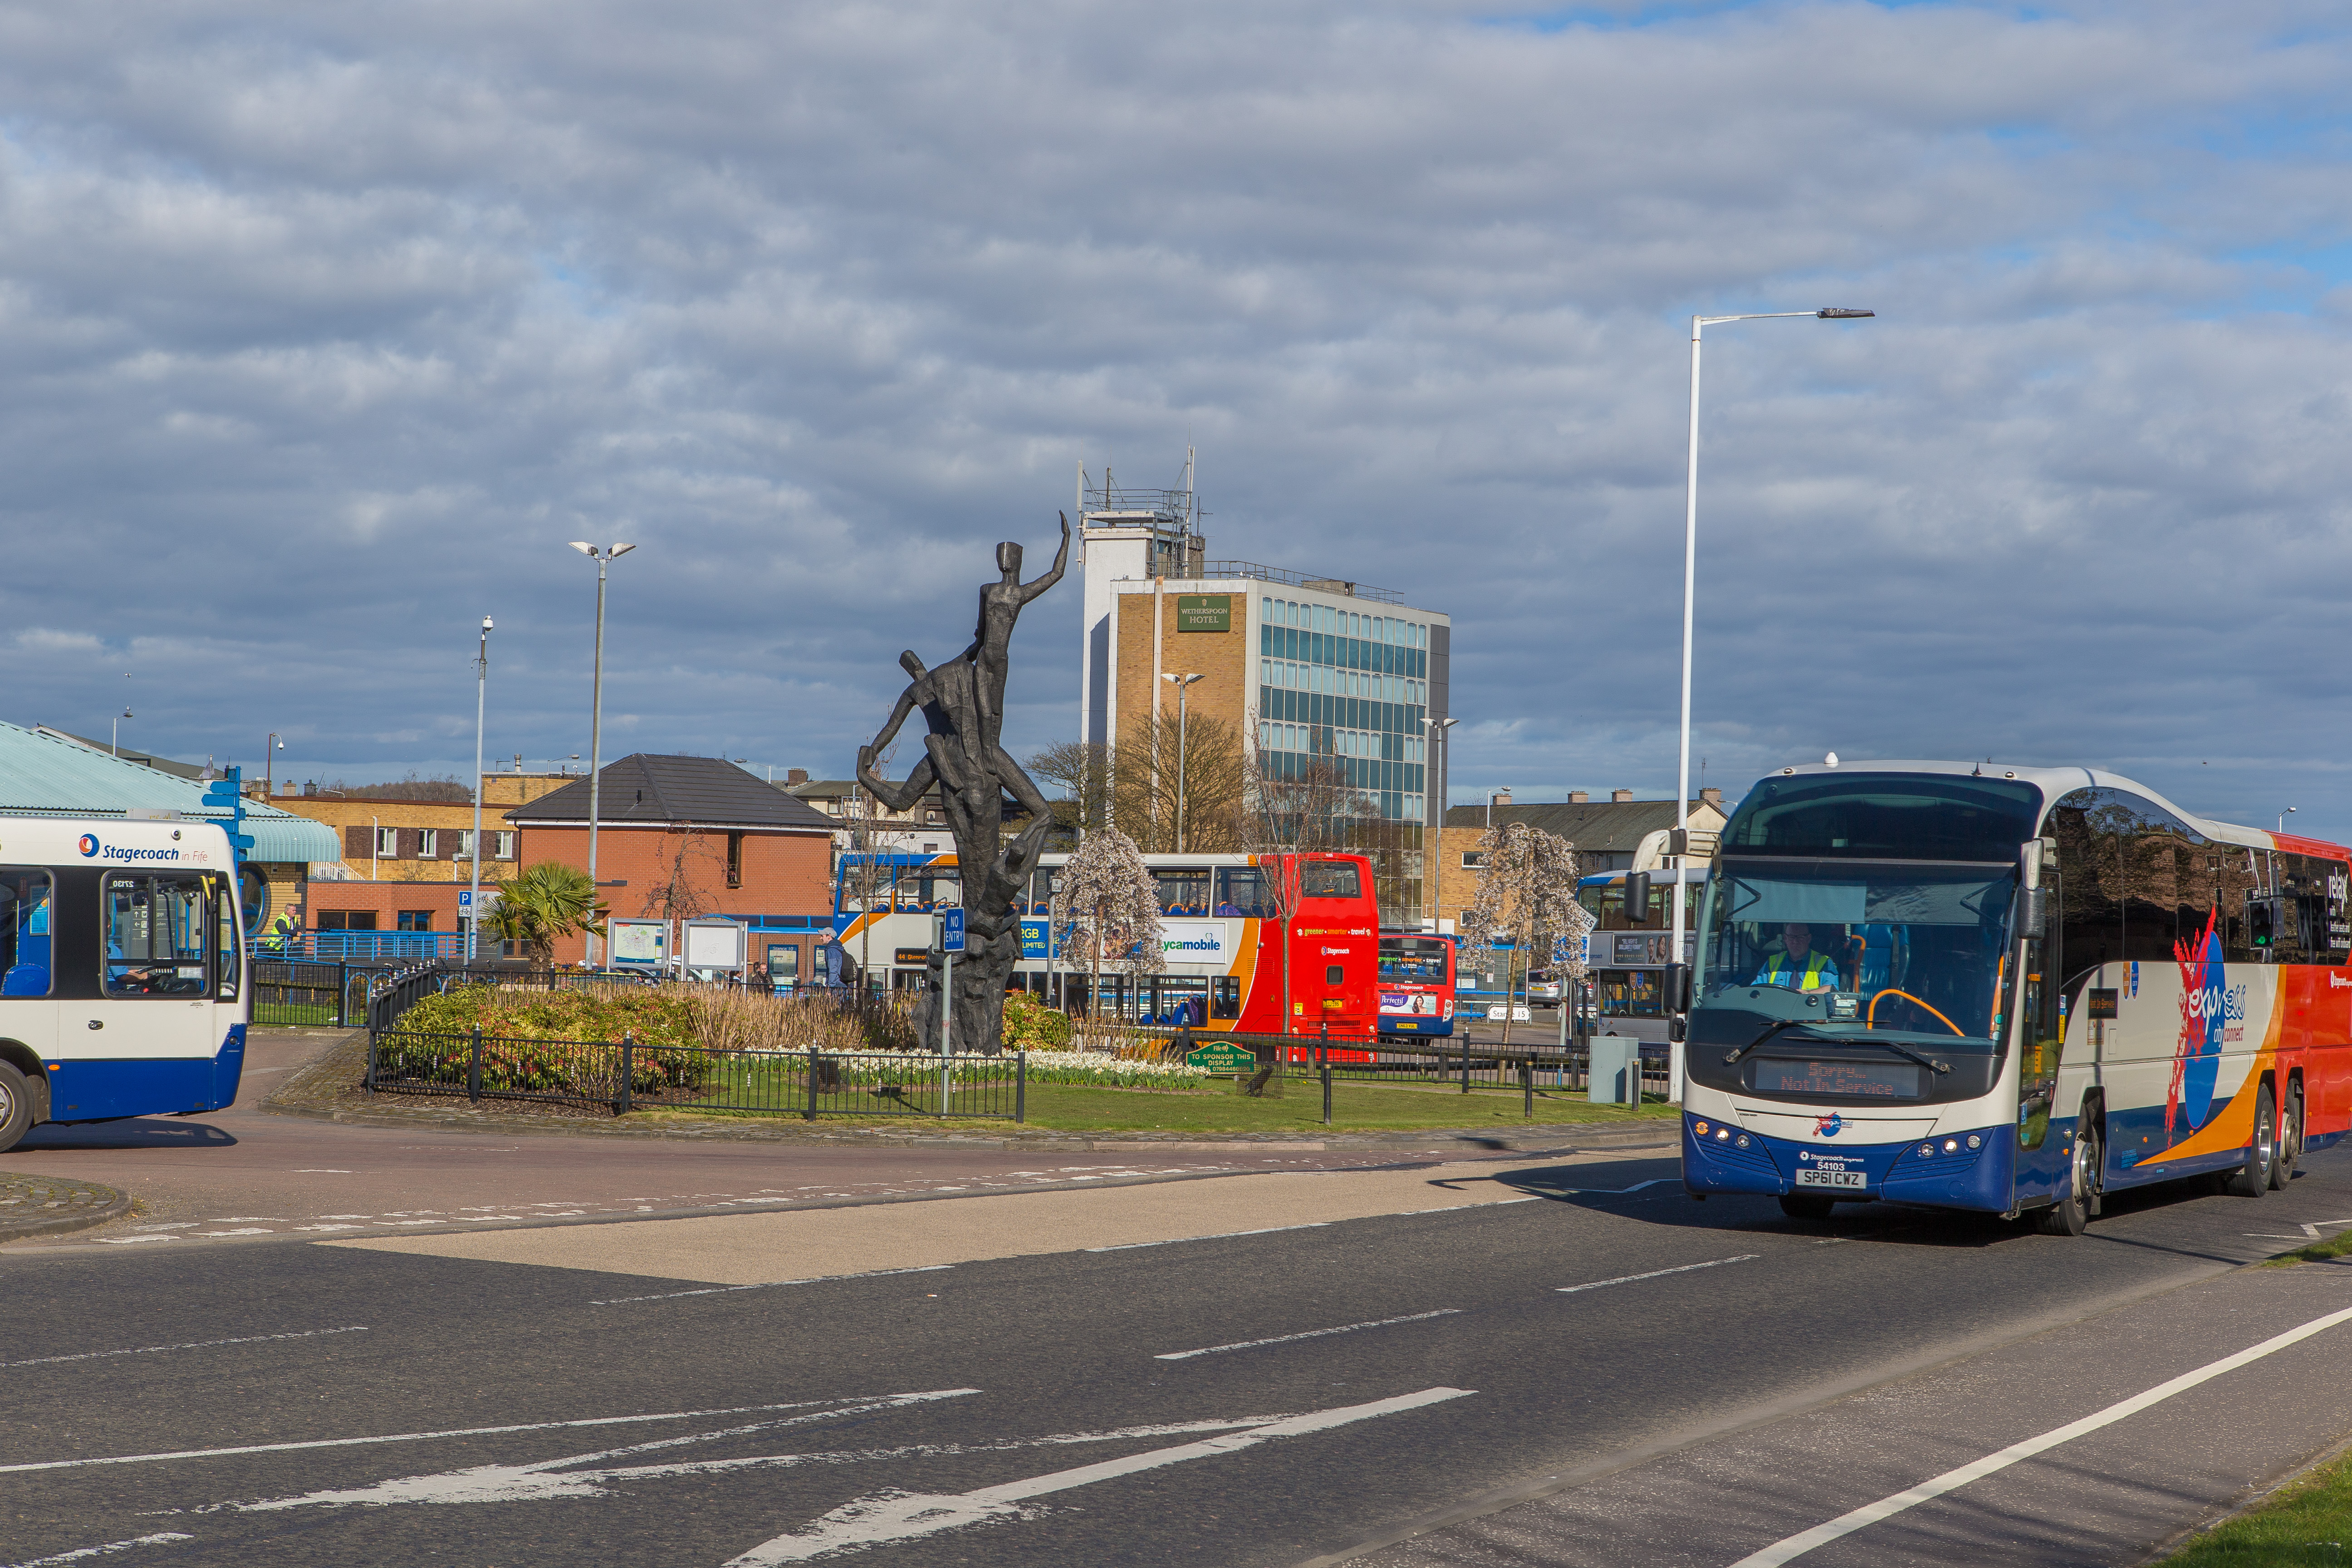 Subsidised passenger transport will be the subject of the new trial in Fife.